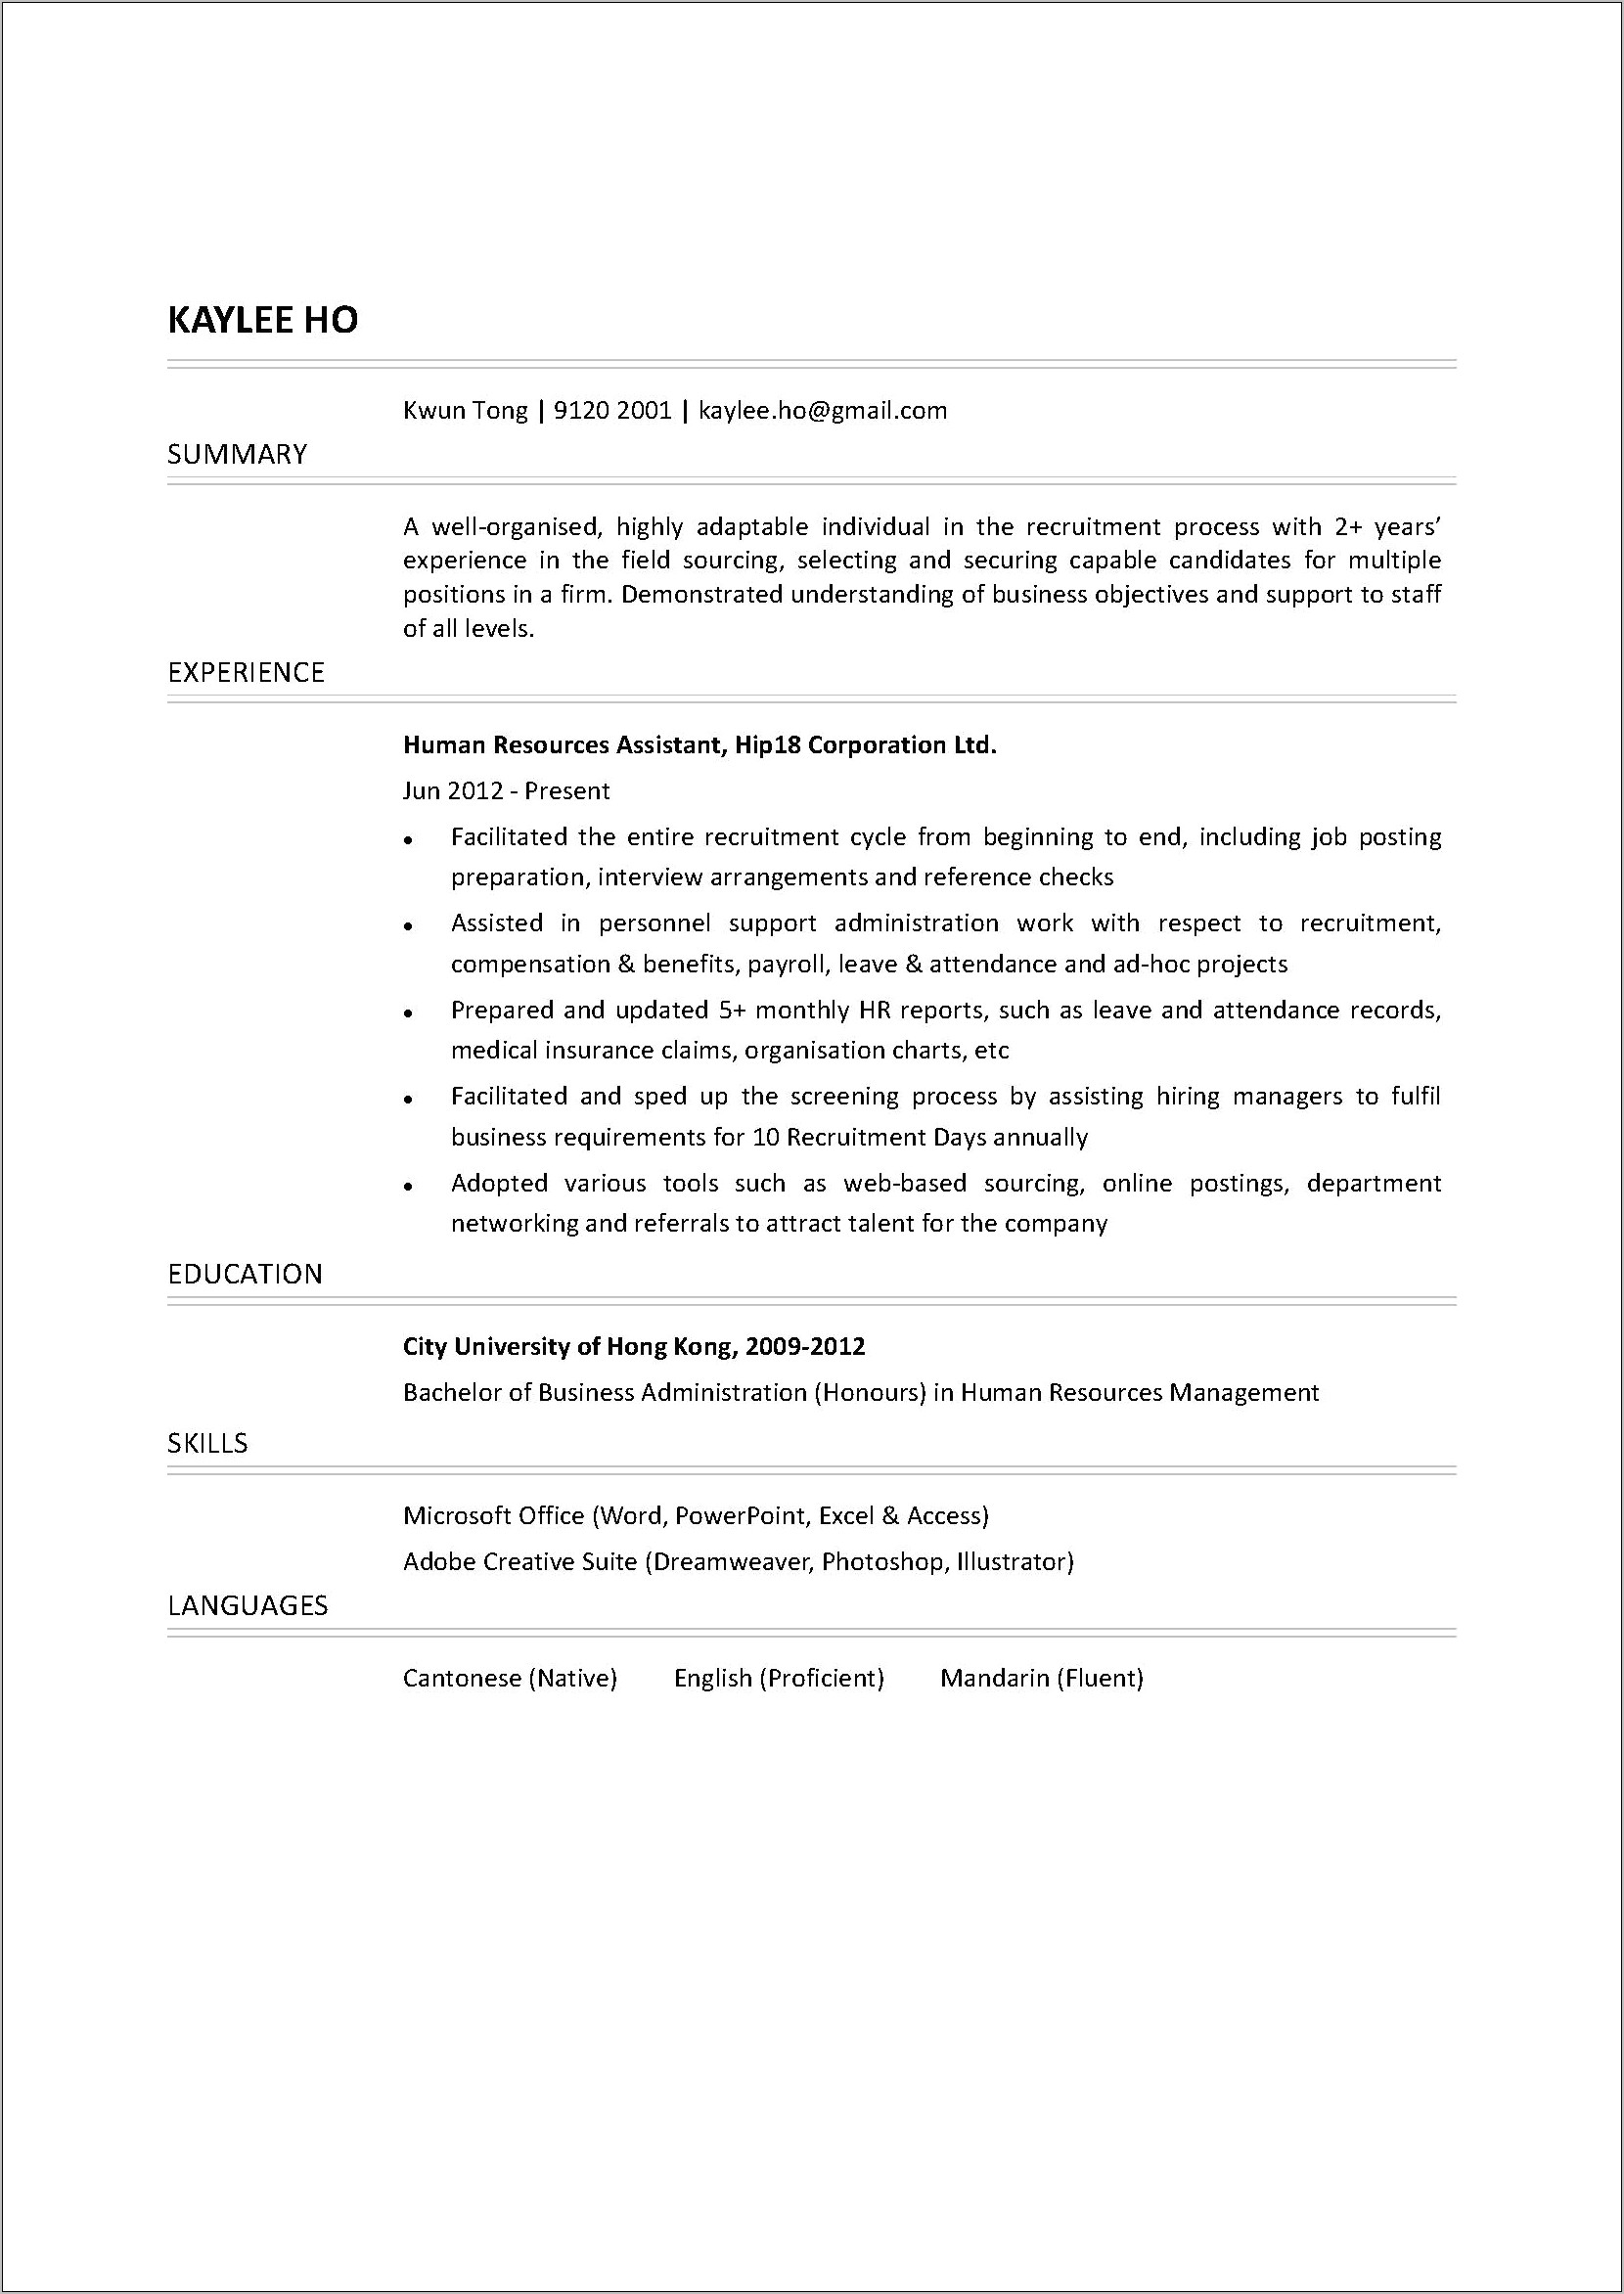 Resume Objective Entry Level Human Resources